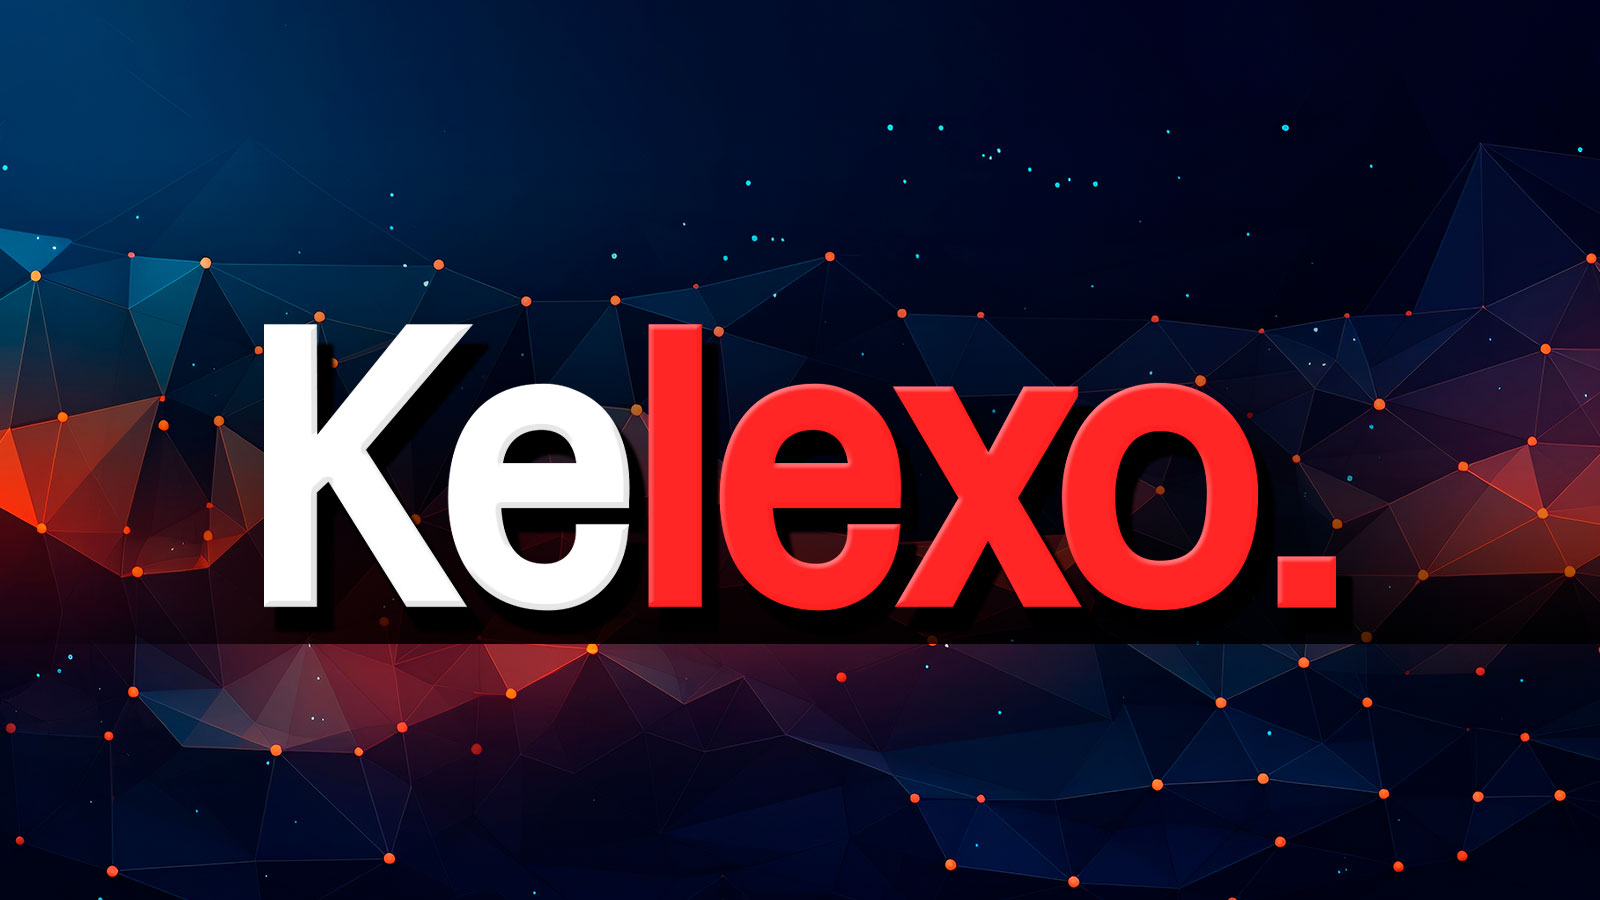 Kelexo (KLXO) Pre-Sale Welcomed by Enthusiasts in March as XRP, USDT Hit Trading Volume ATHs